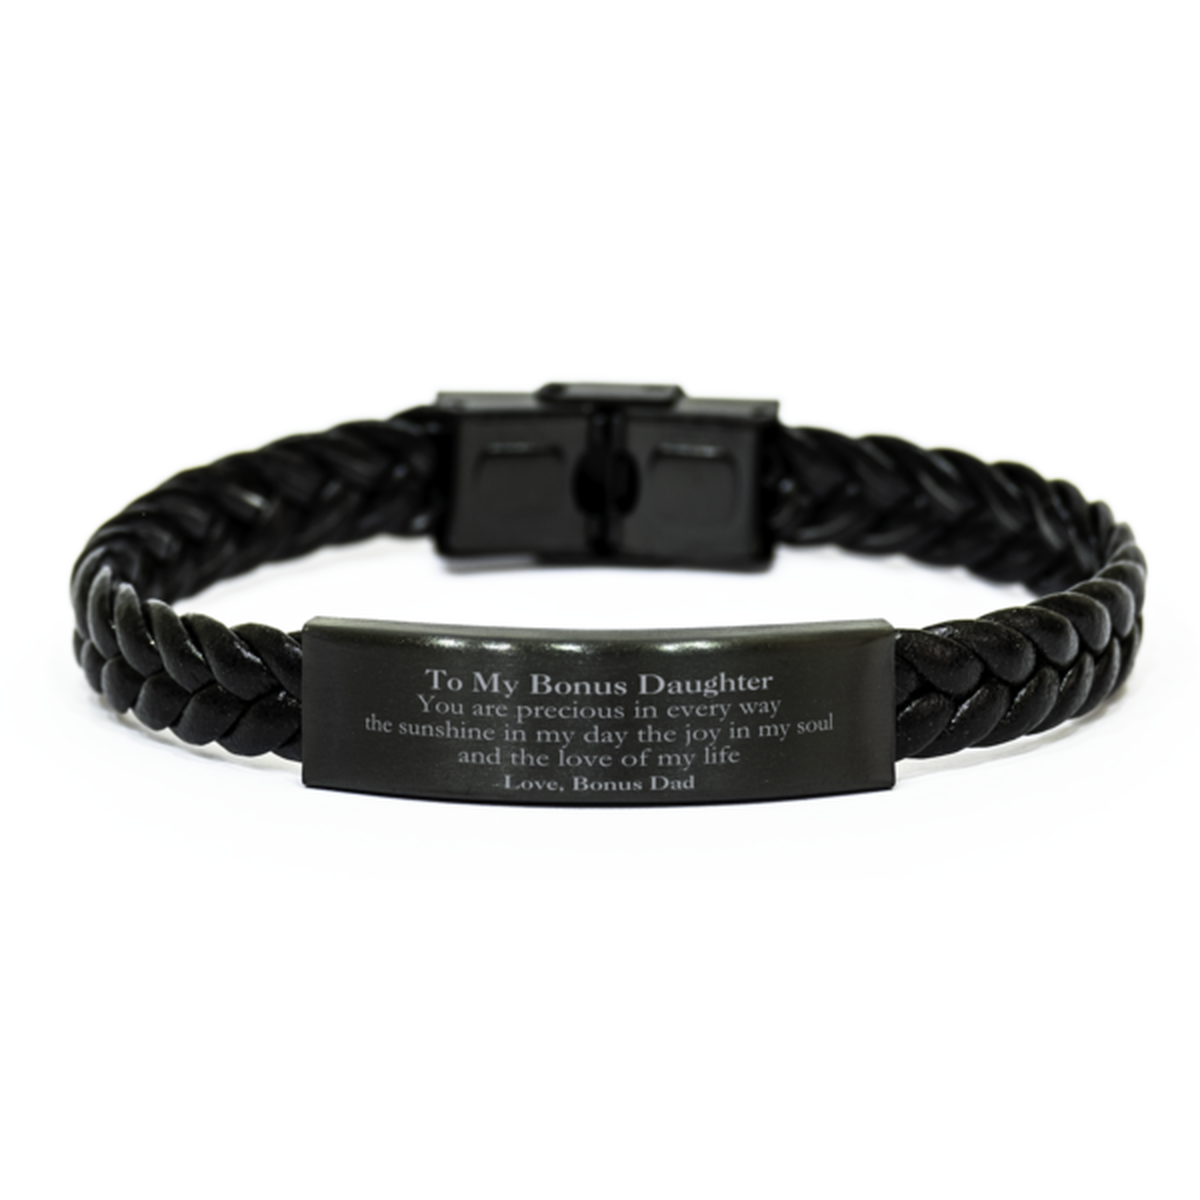 Graduation Gifts for Bonus Daughter Braided Leather Bracelet Present from Bonus Dad, Christmas Bonus Daughter Birthday Gifts Bonus Daughter You are precious in every way the sunshine in my day. Love, Bonus Dad